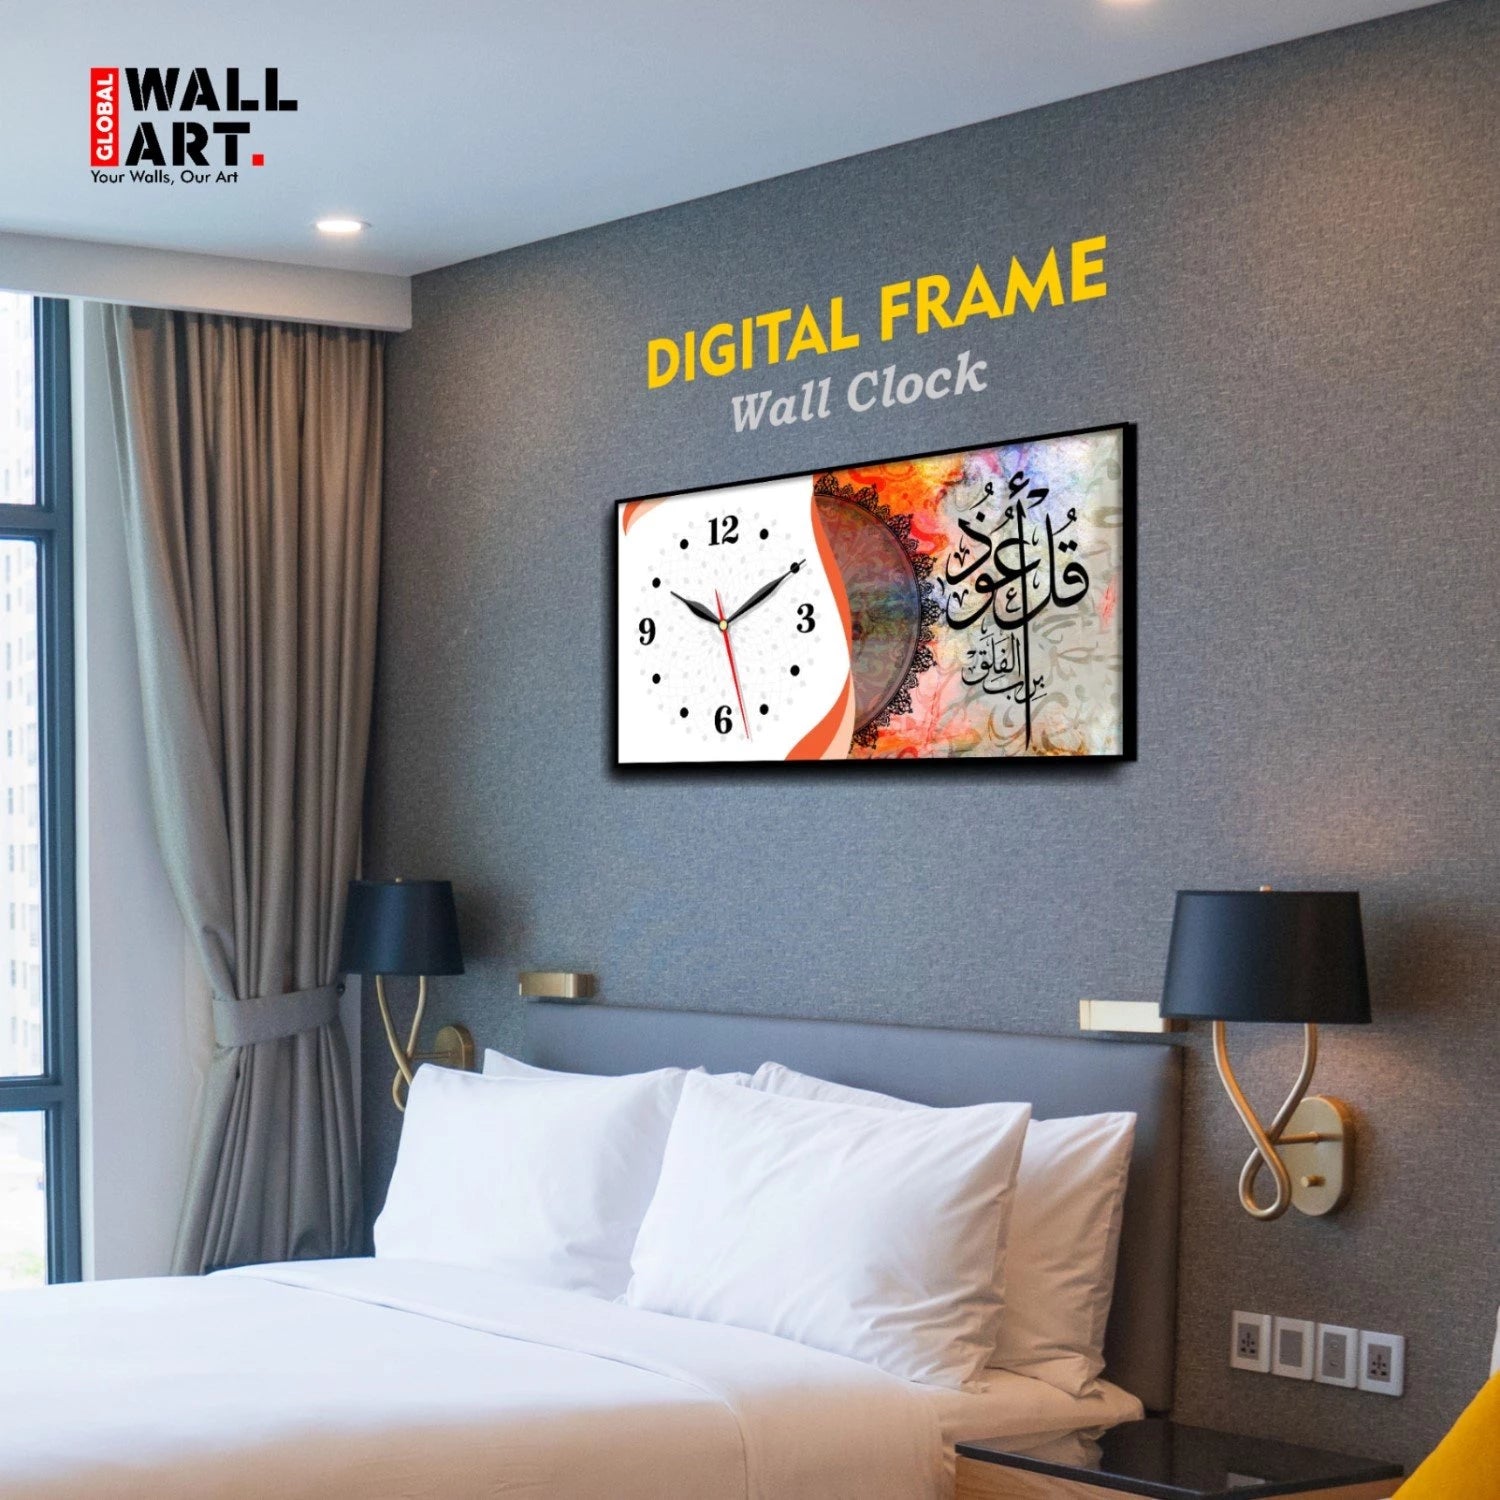 Digital Printing Wall Clock Frame Best for House and Office